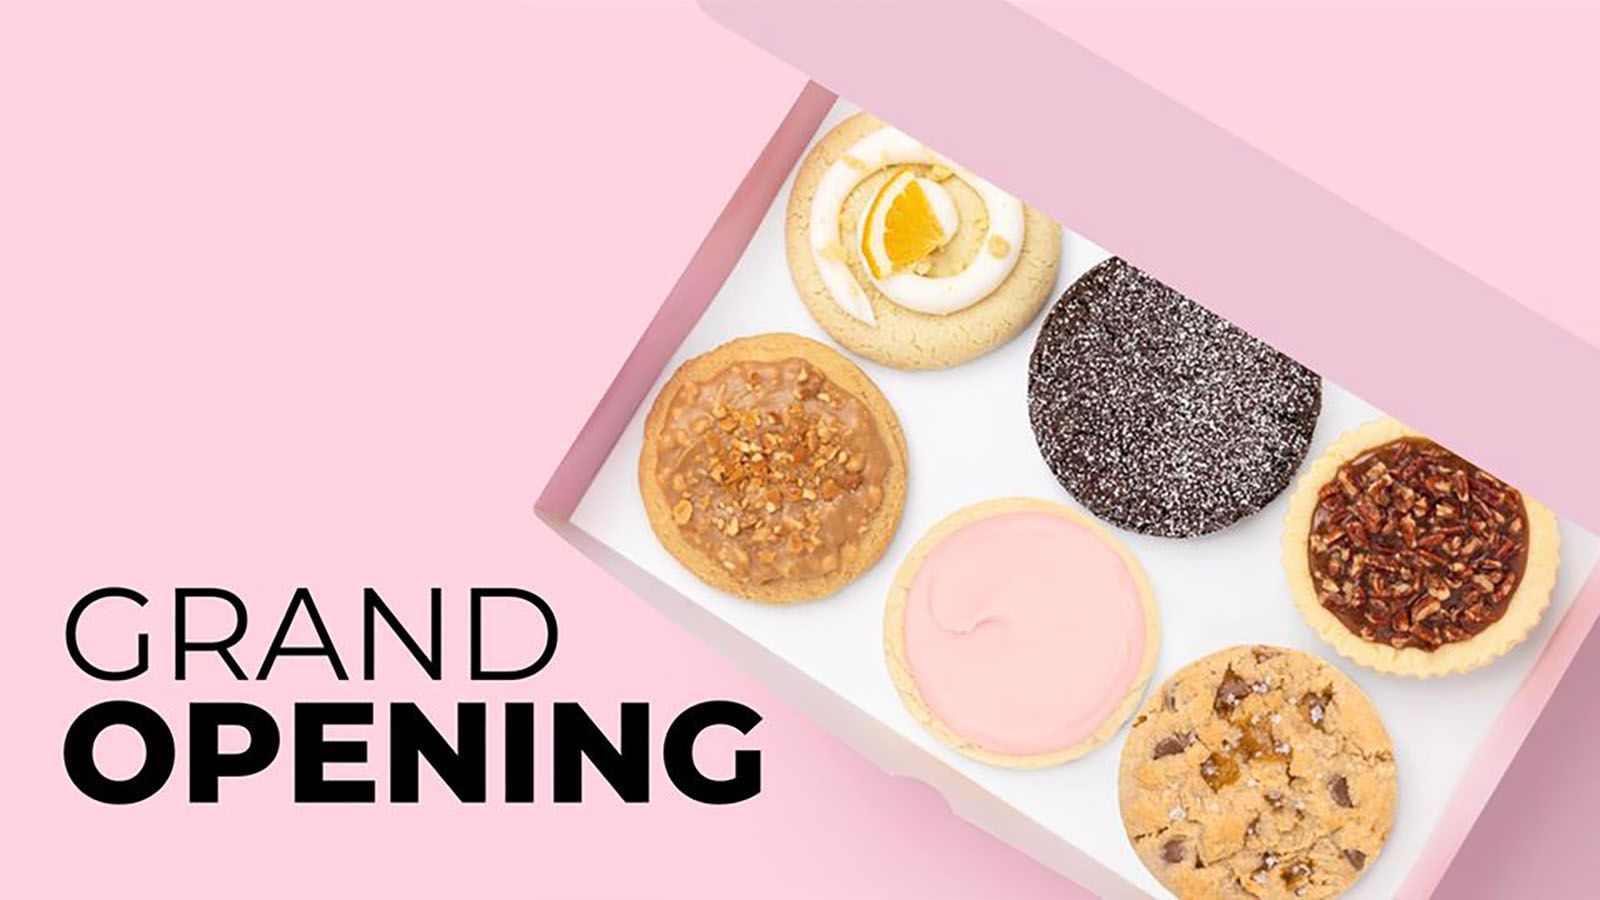 Crumbl Cookies will open at Orchard Crossing on Dec. 9.